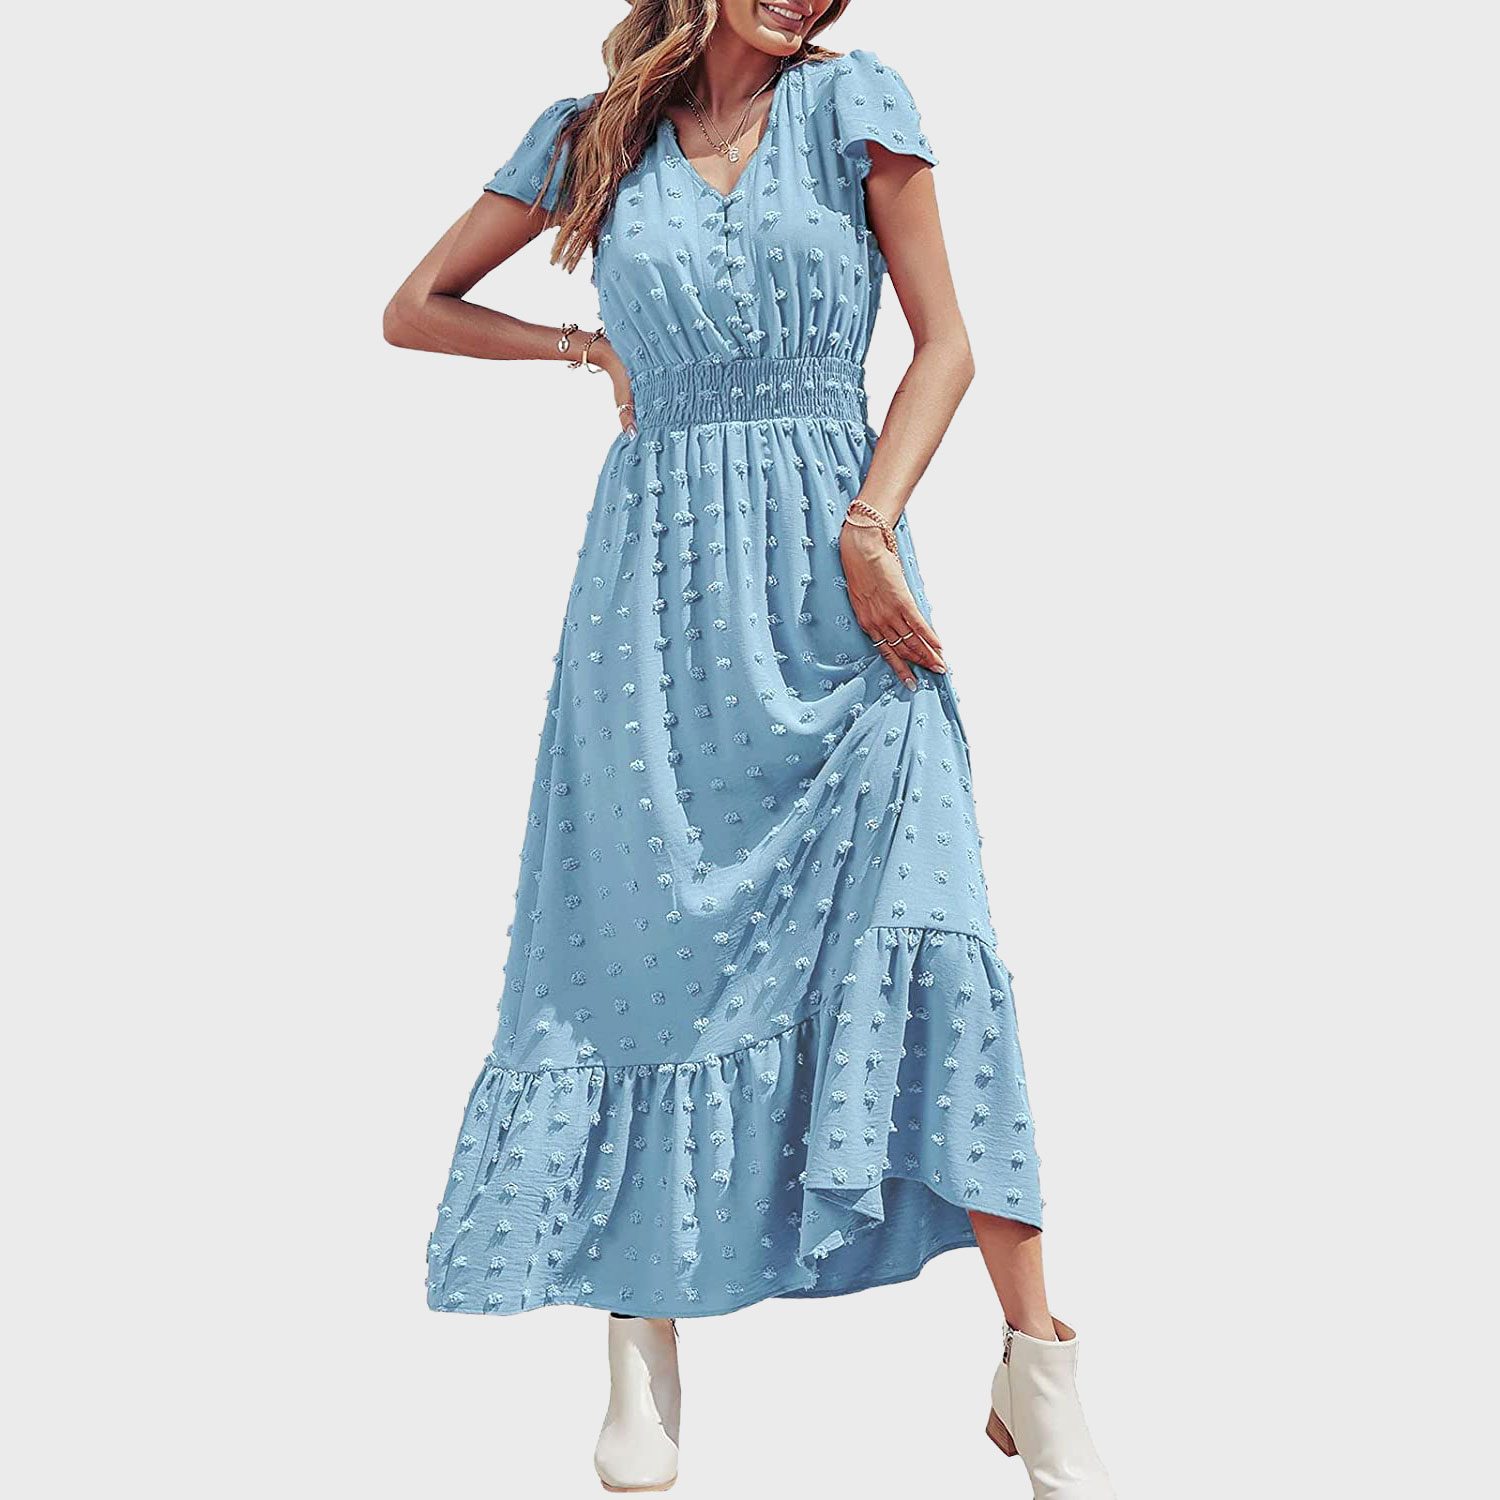 15 Best Amazon Summer Dresses of 2023: Maxi, Midi, Casual and More